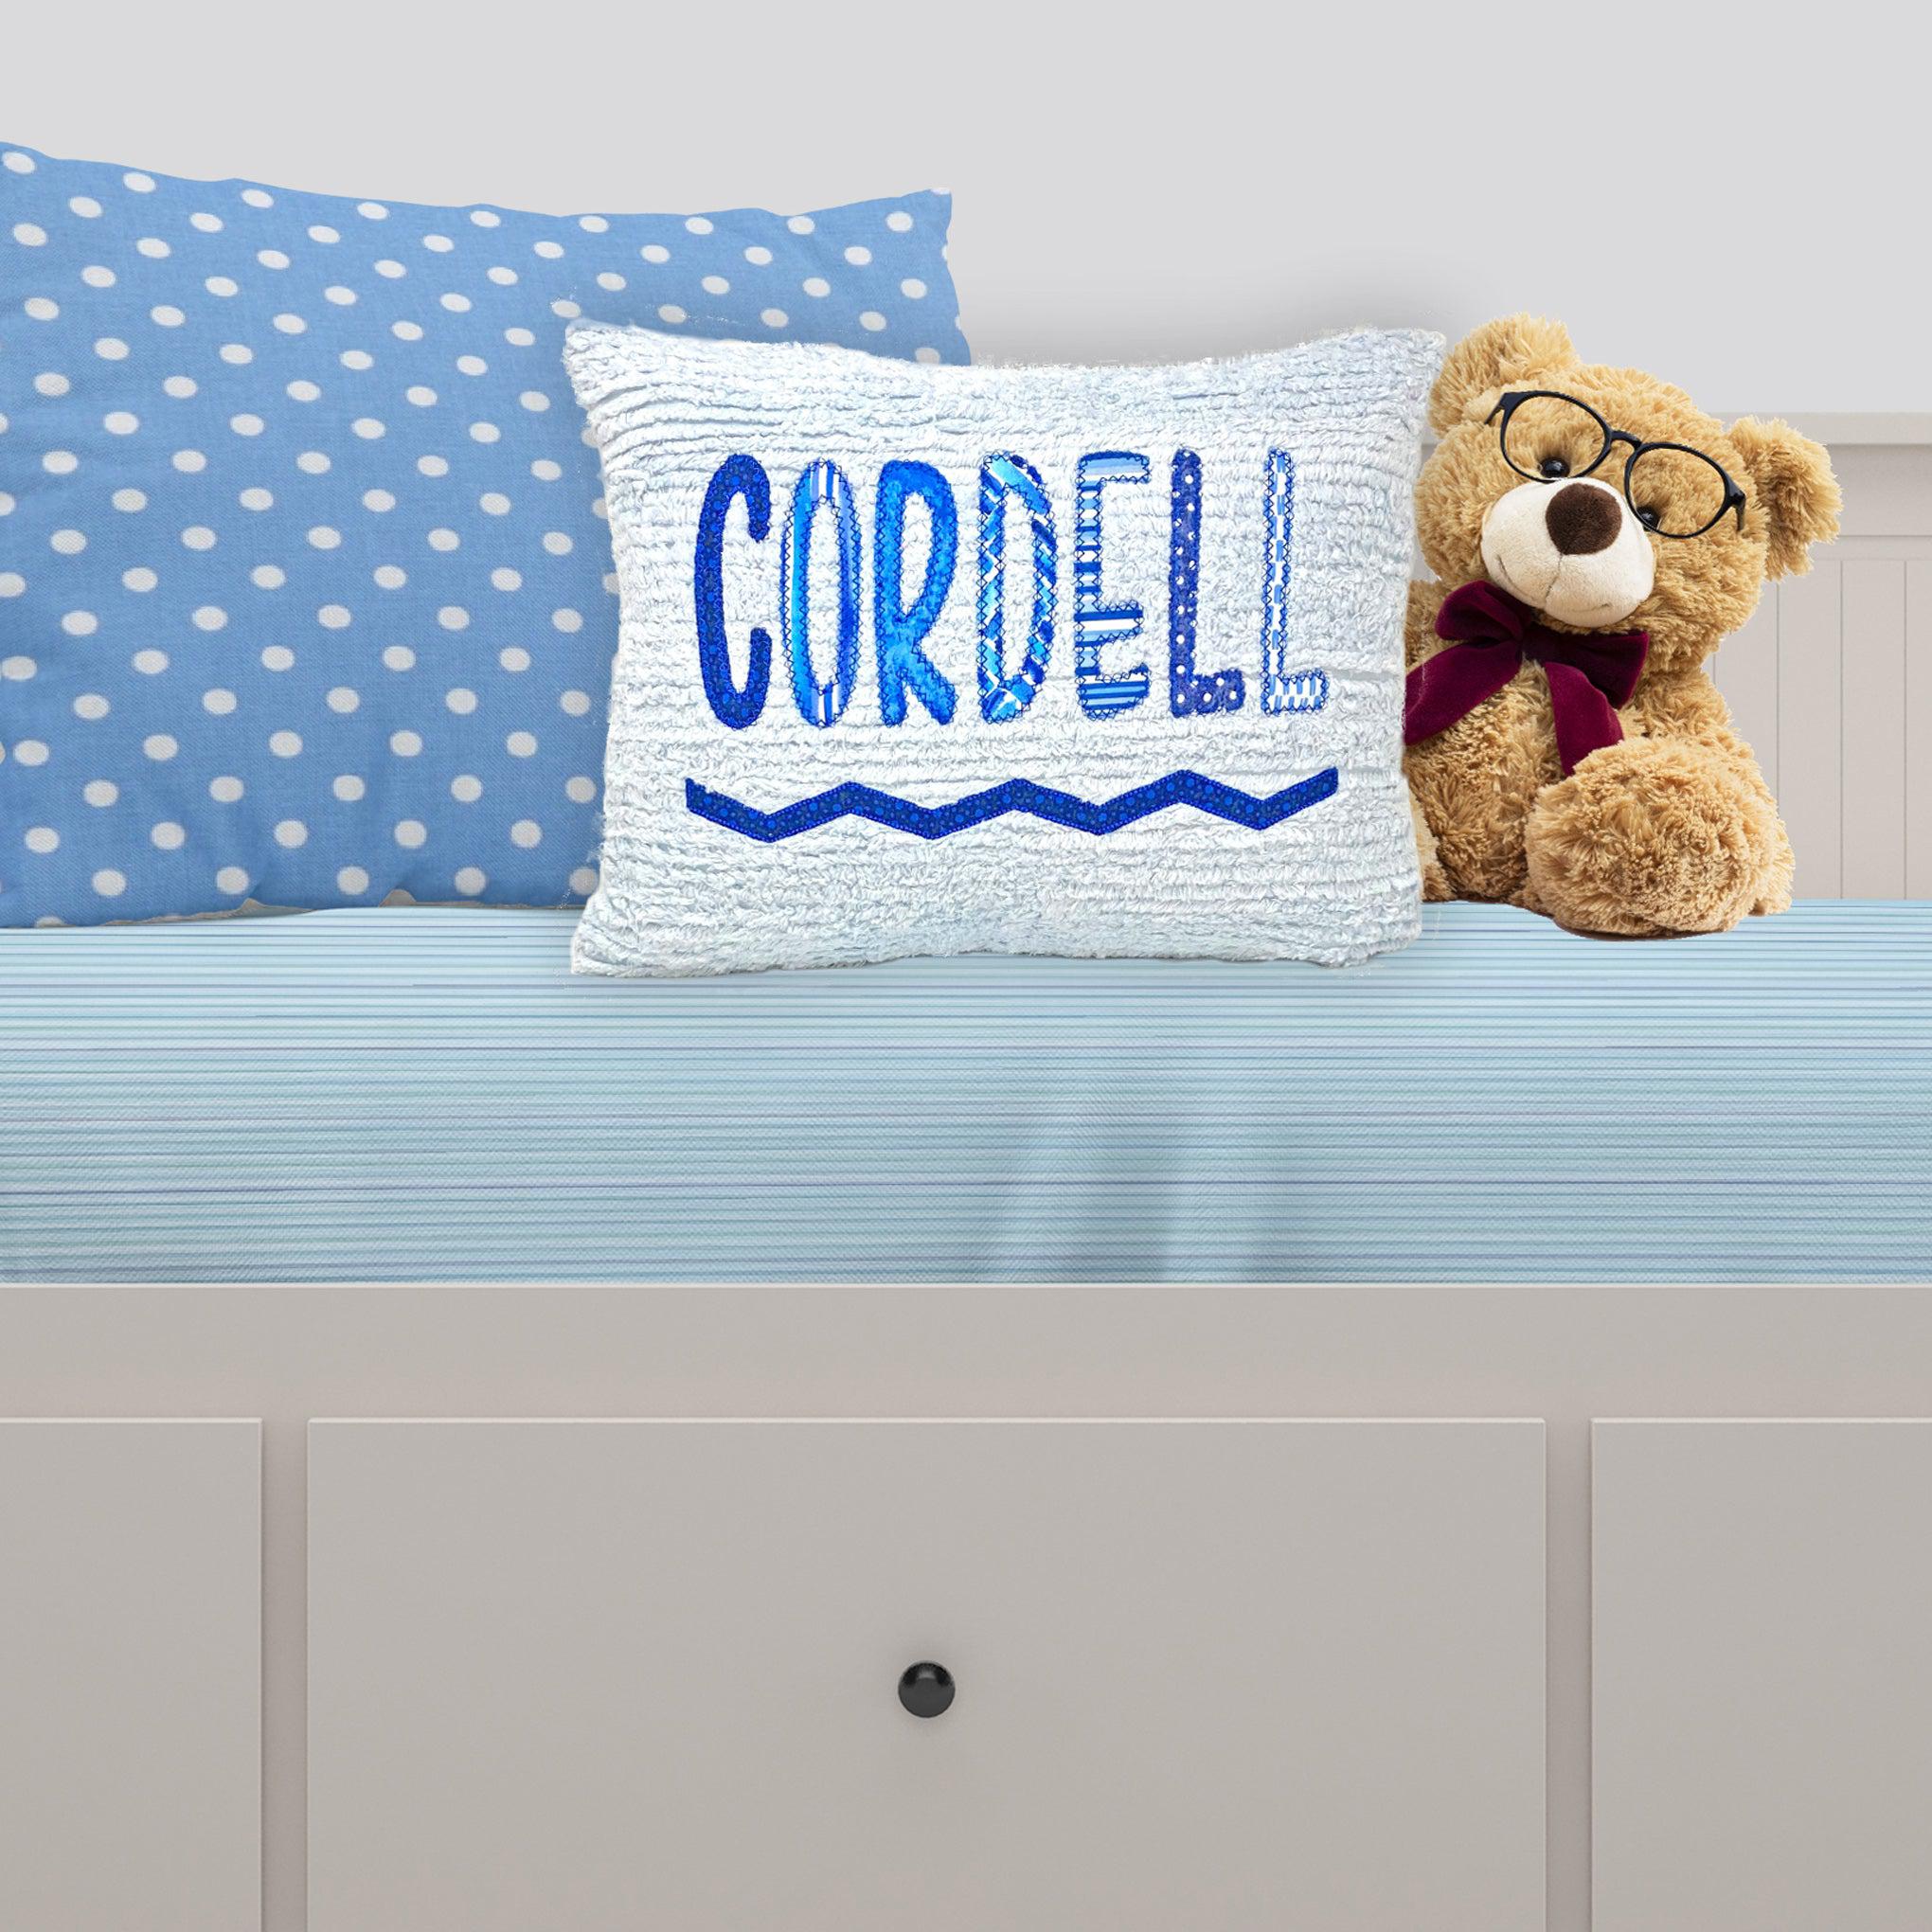 Adorable bule chenille pillow with applique name in blue prints.  Kids love personalized items.